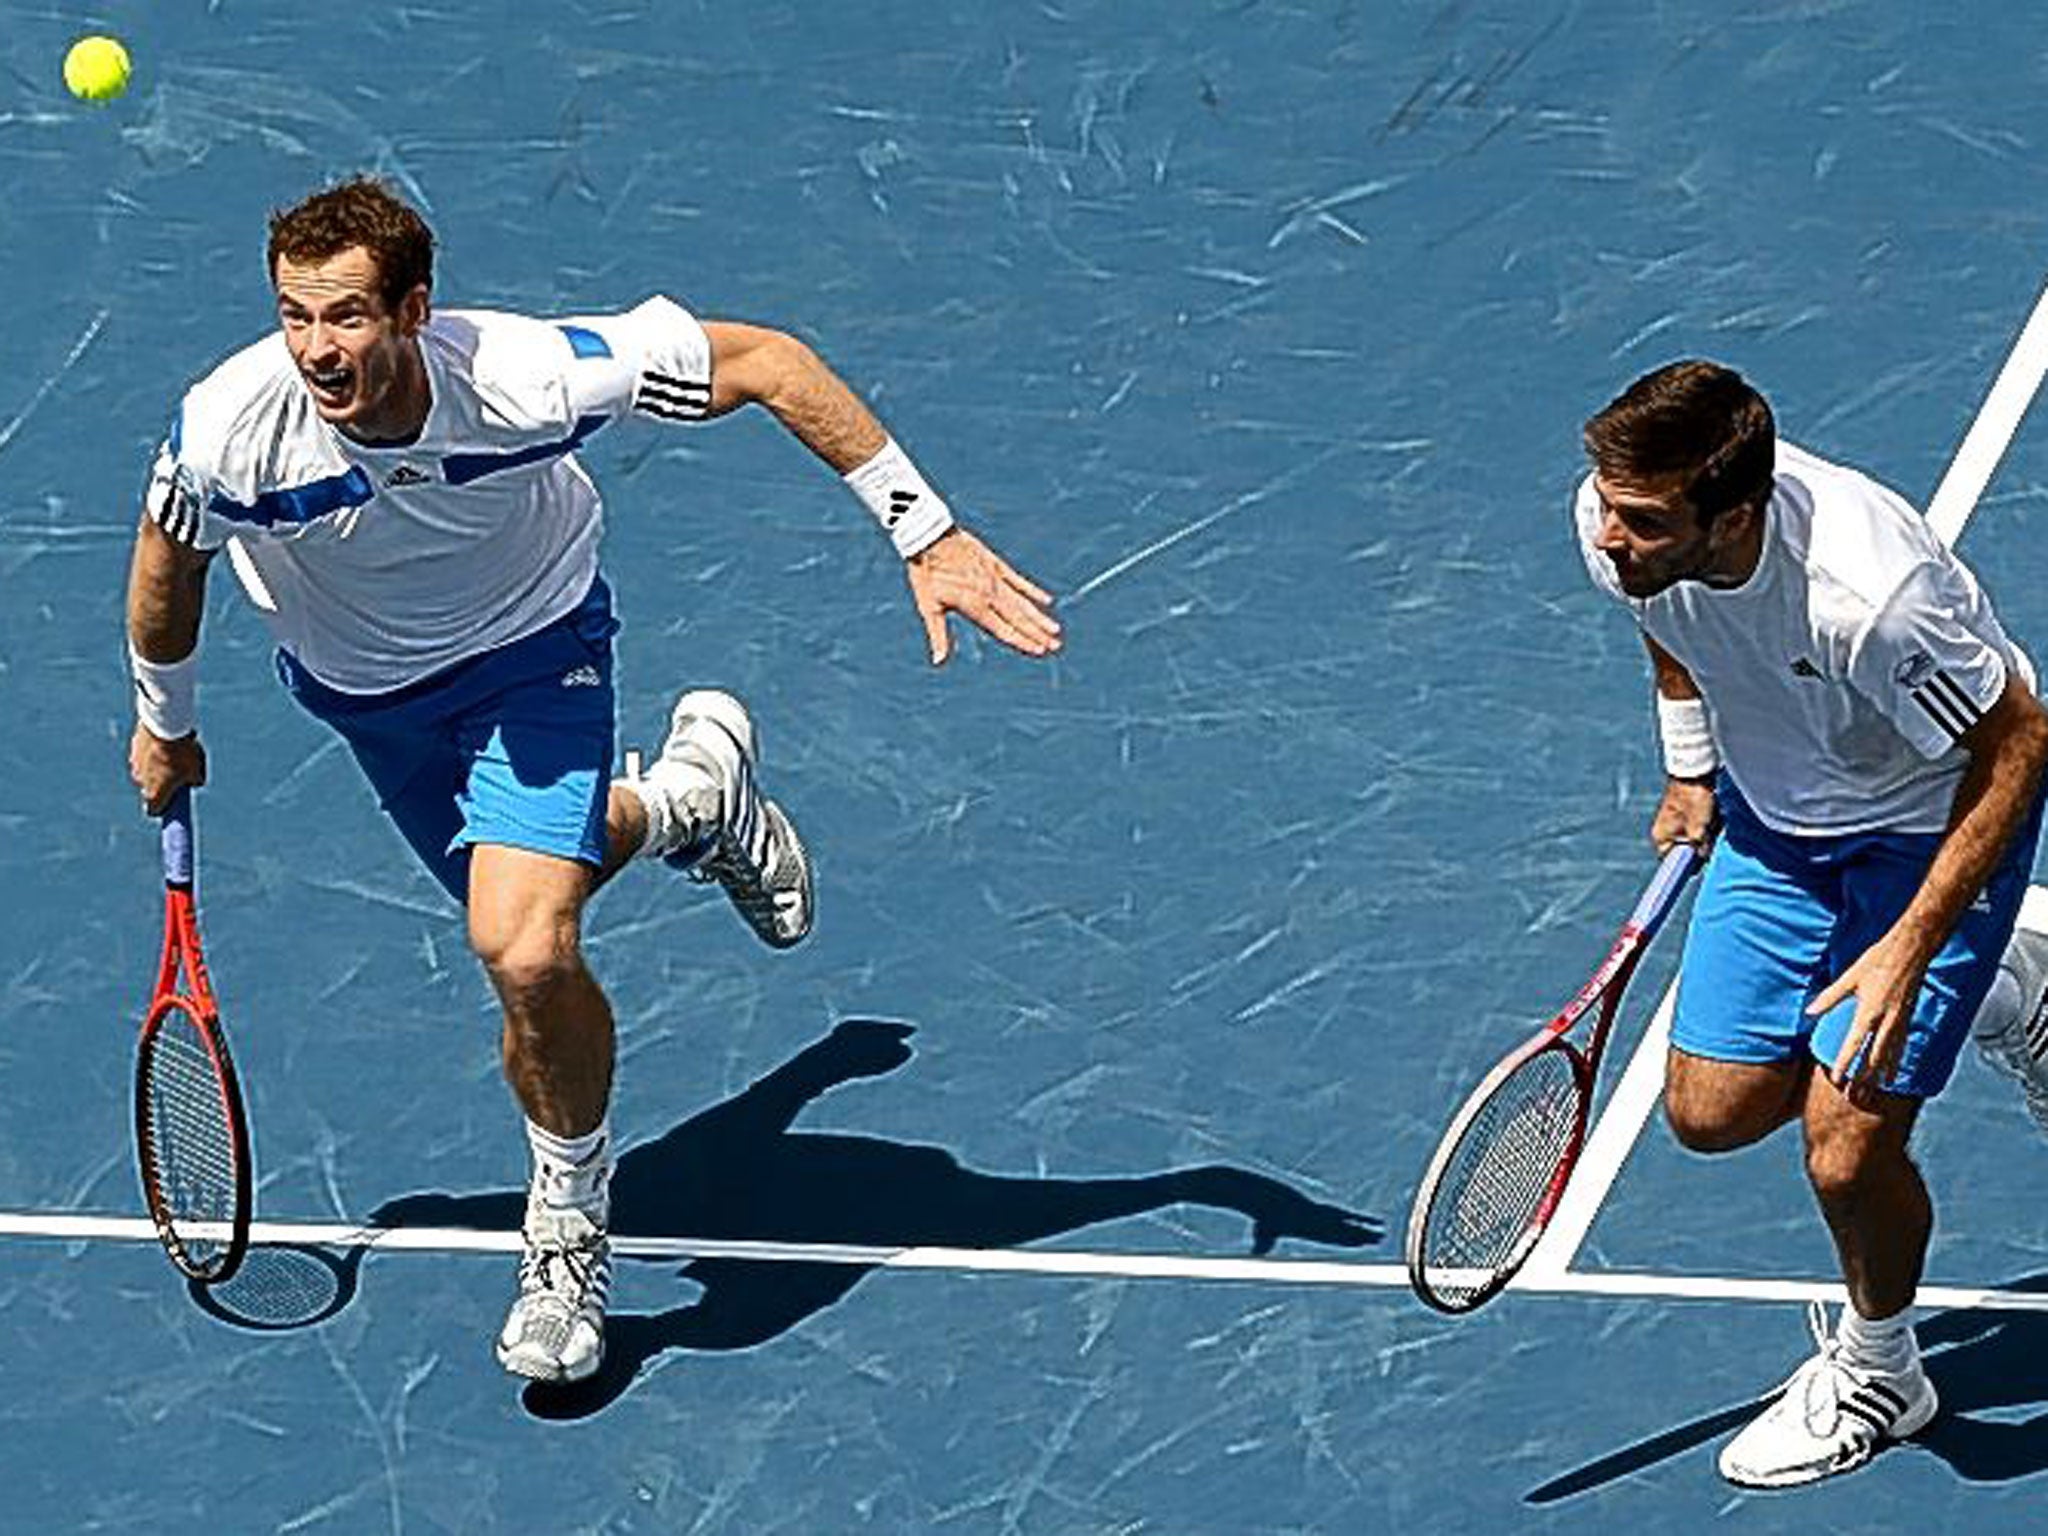 Andy Murray and Colin Fleming lost in the final in Montreal